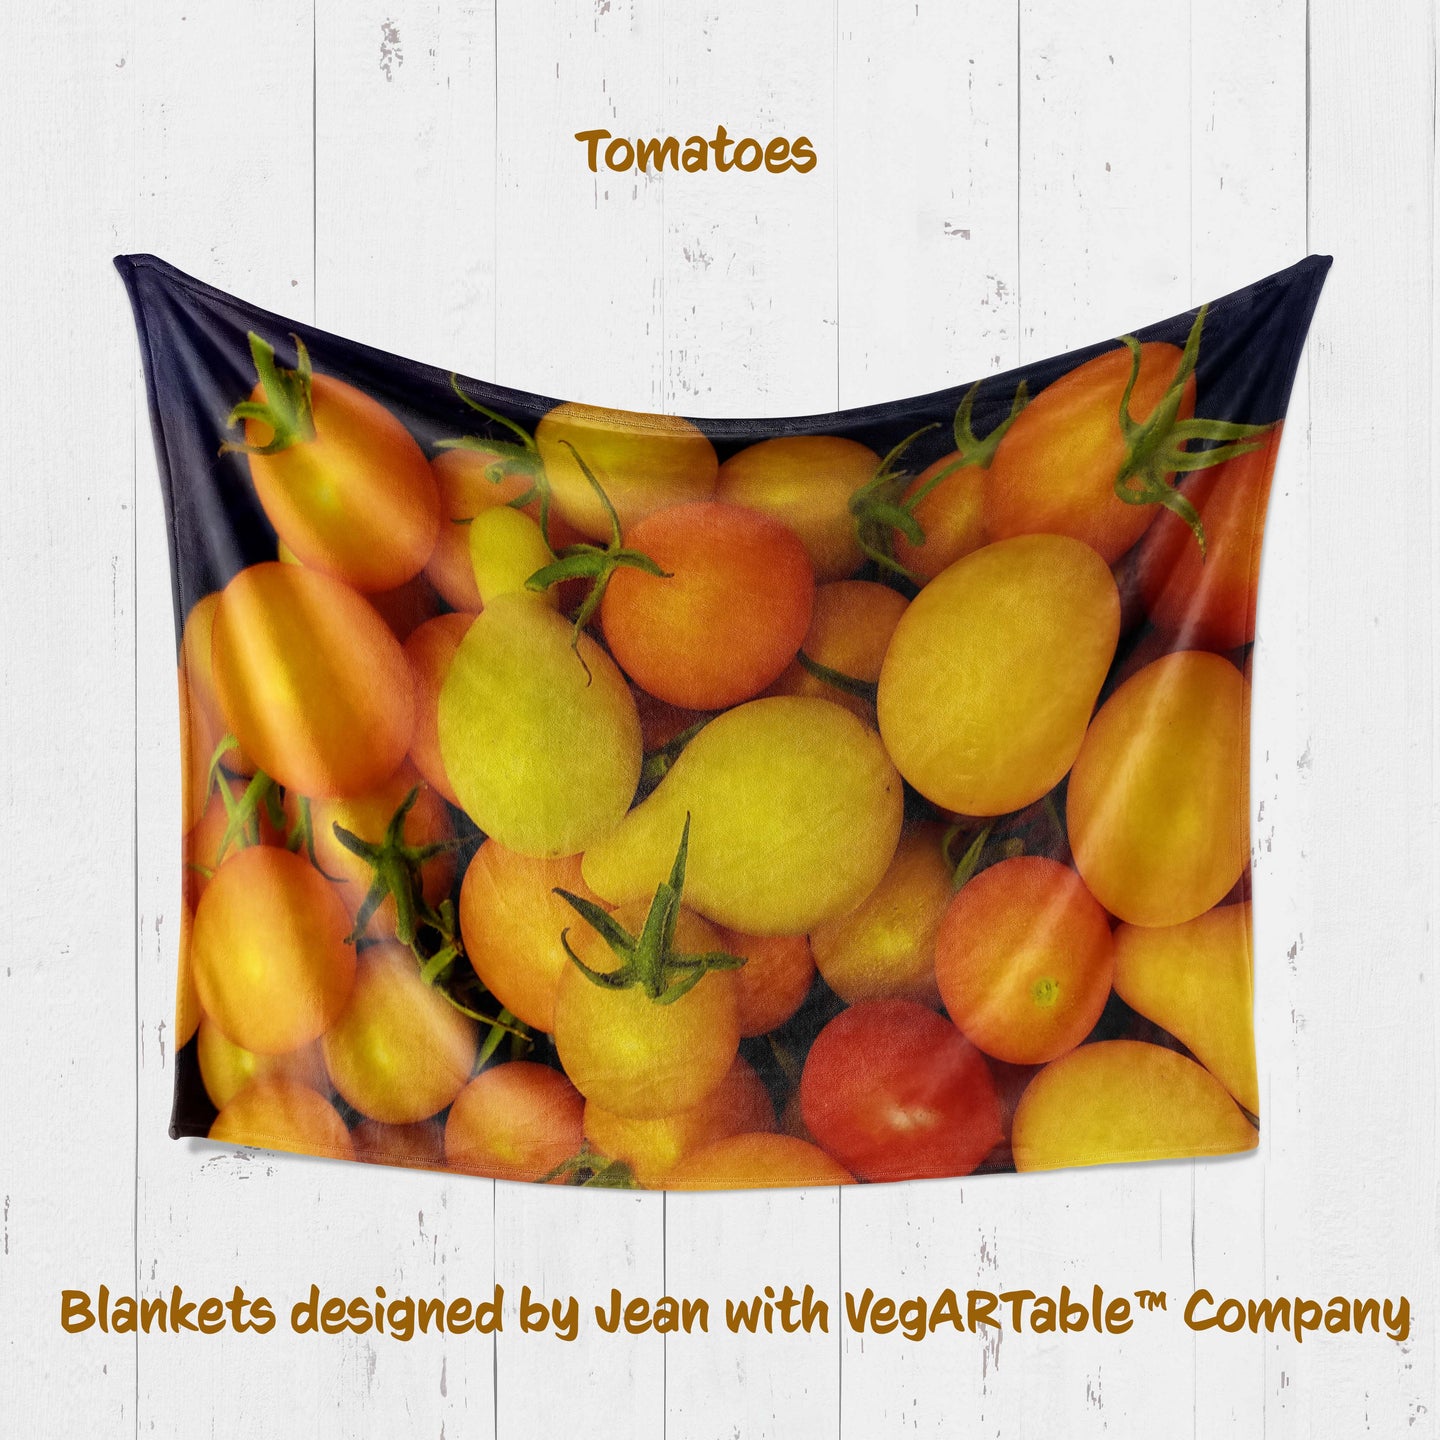 Tomato Blanket designed by Jean with VegARTable™ Company